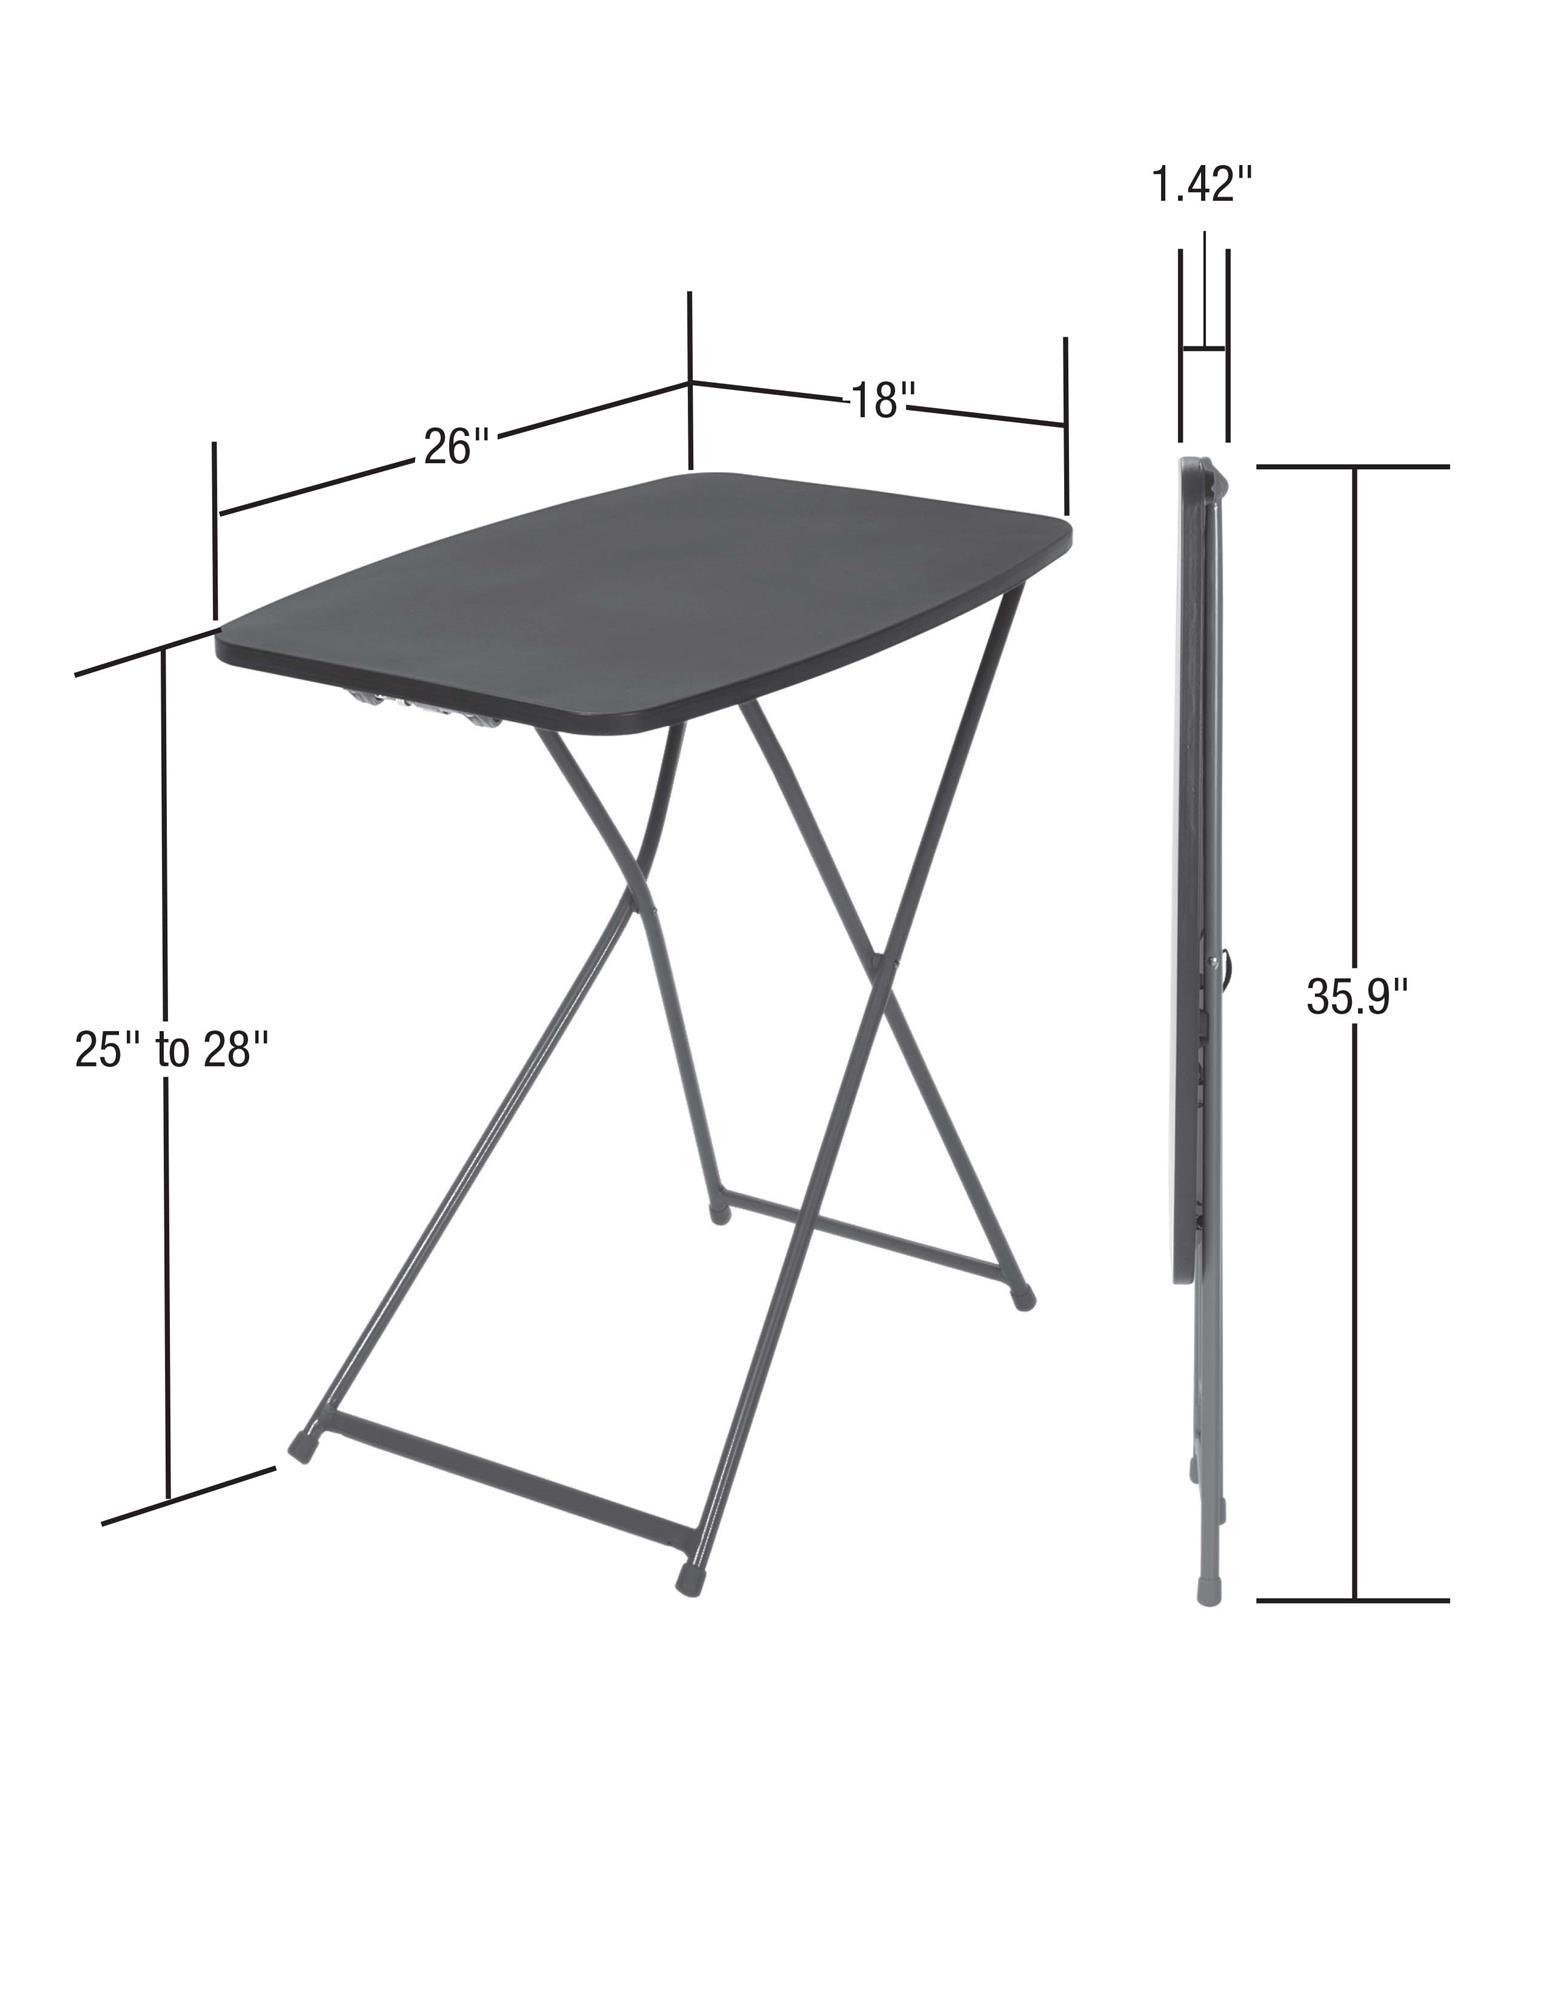 Mainstays 26" Adjustable Height Personal Folding Table, Black - image 4 of 4